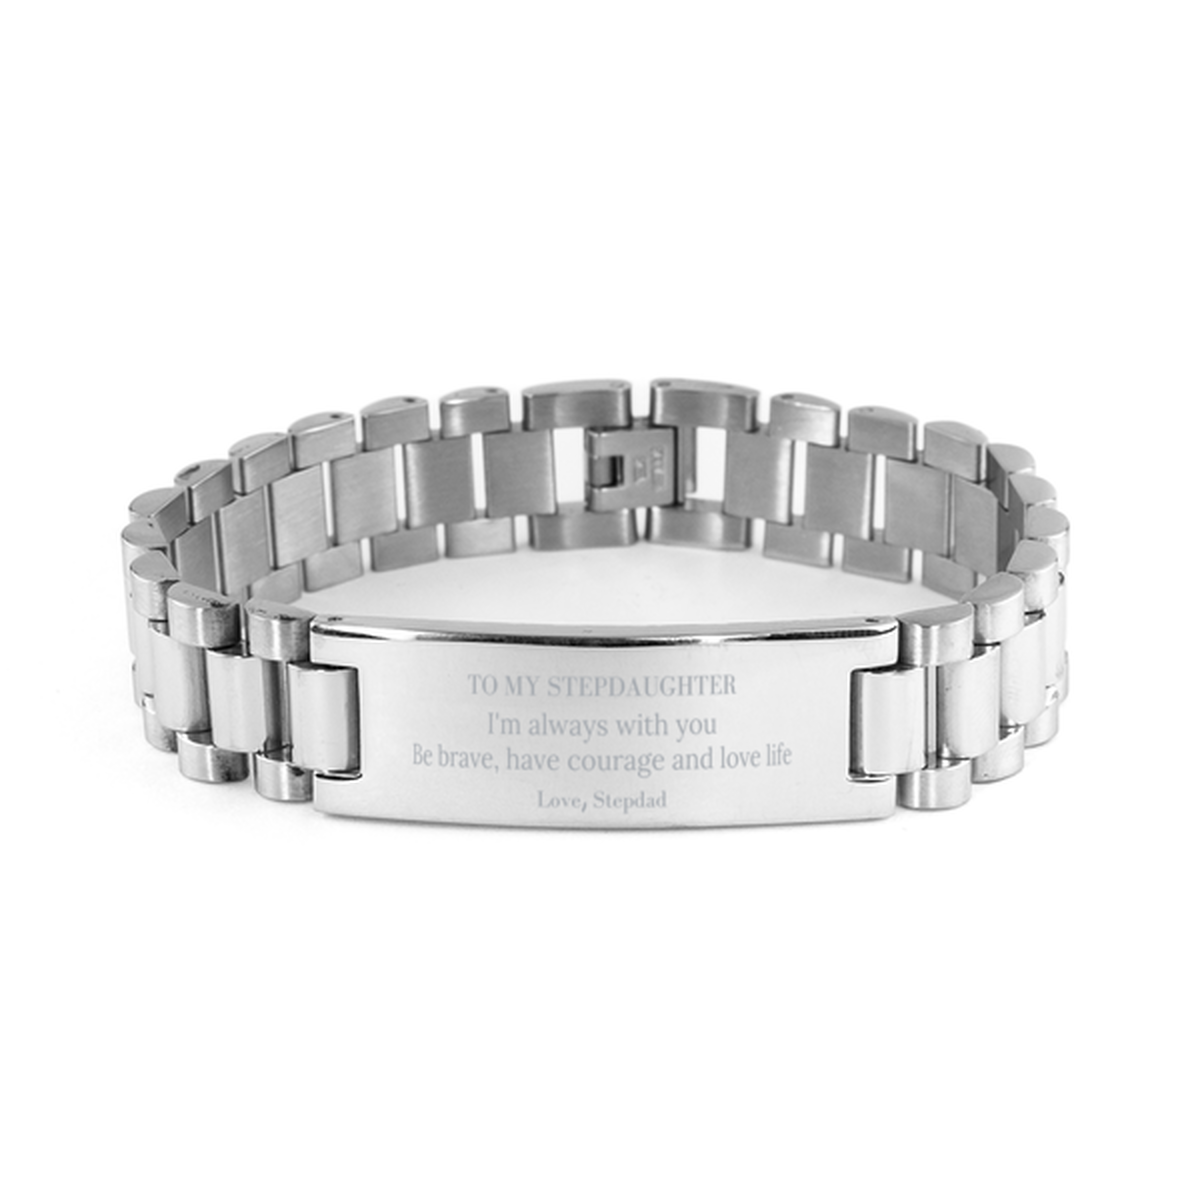 To My Stepdaughter Gifts from Stepdad, Unique Ladder Stainless Steel Bracelet Inspirational Christmas Birthday Graduation Gifts for Stepdaughter I'm always with you. Be brave, have courage and love life. Love, Stepdad